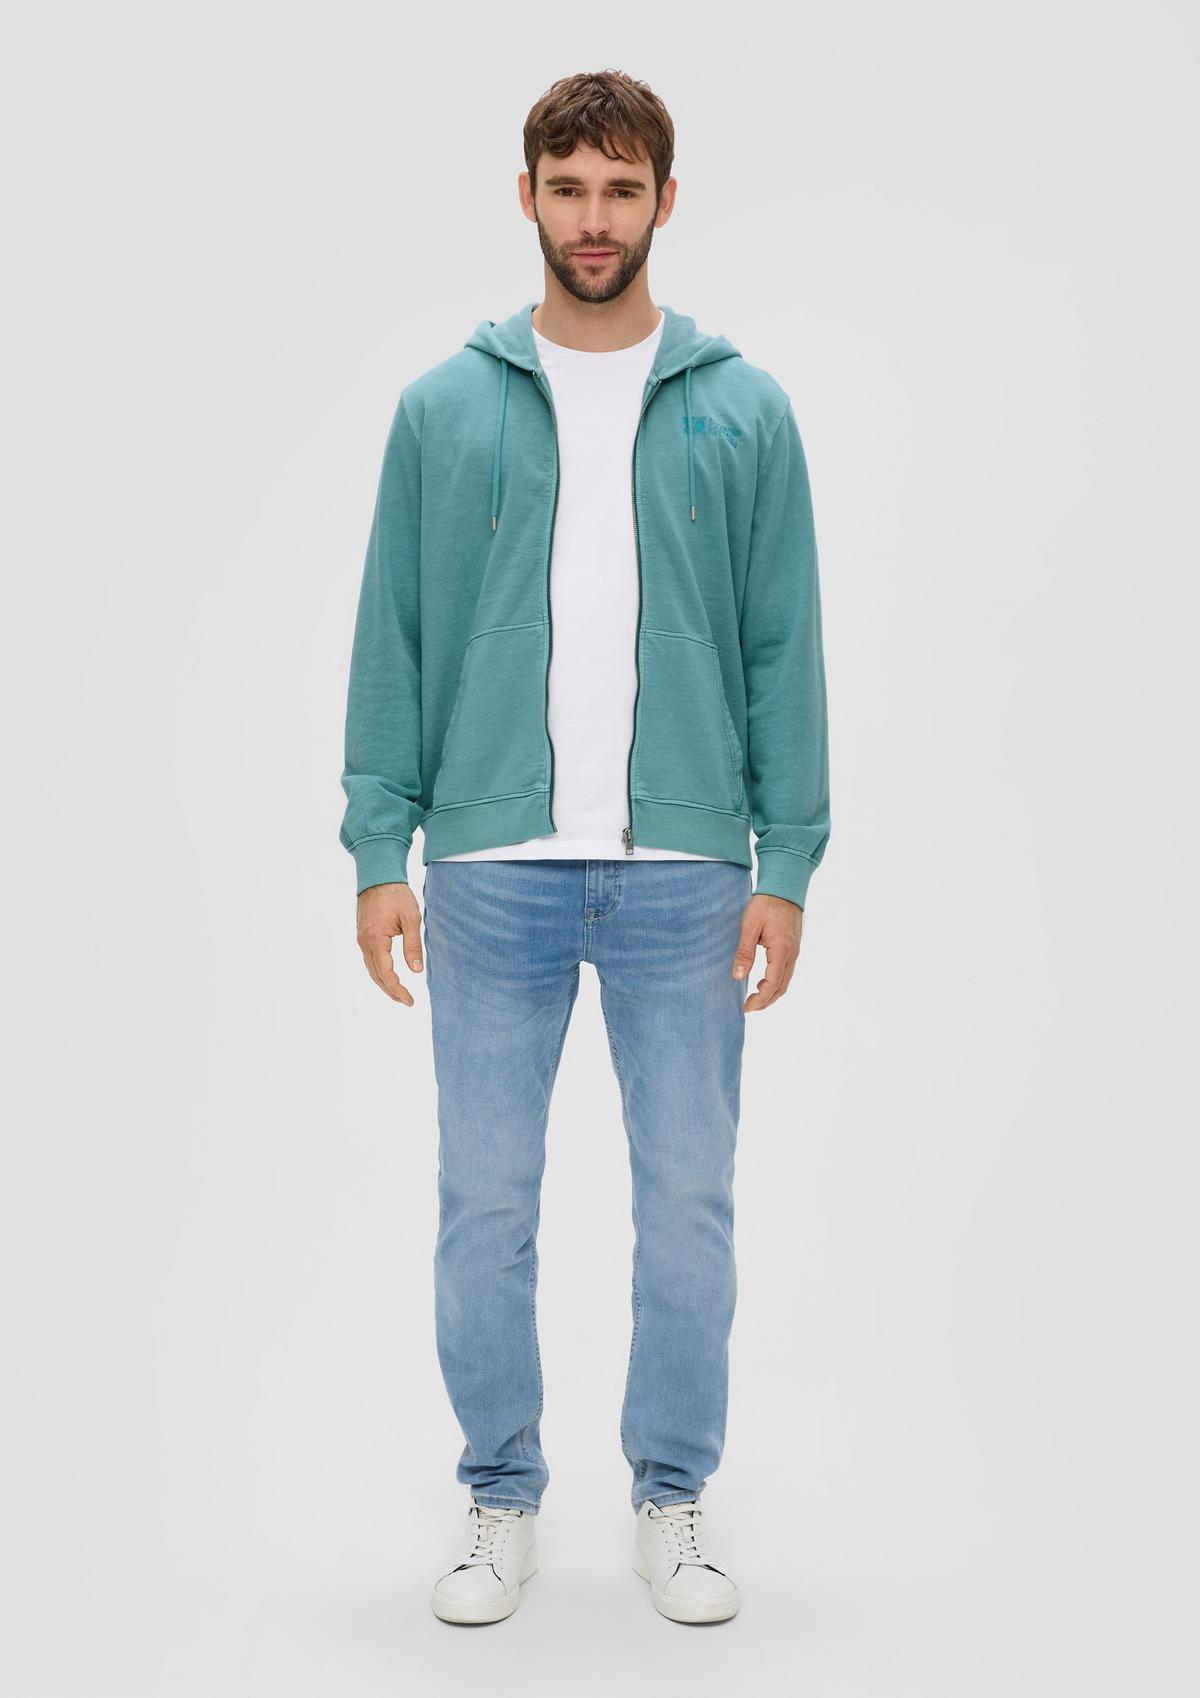 s.Oliver Garment-dyed sweatshirt jacket with a hood